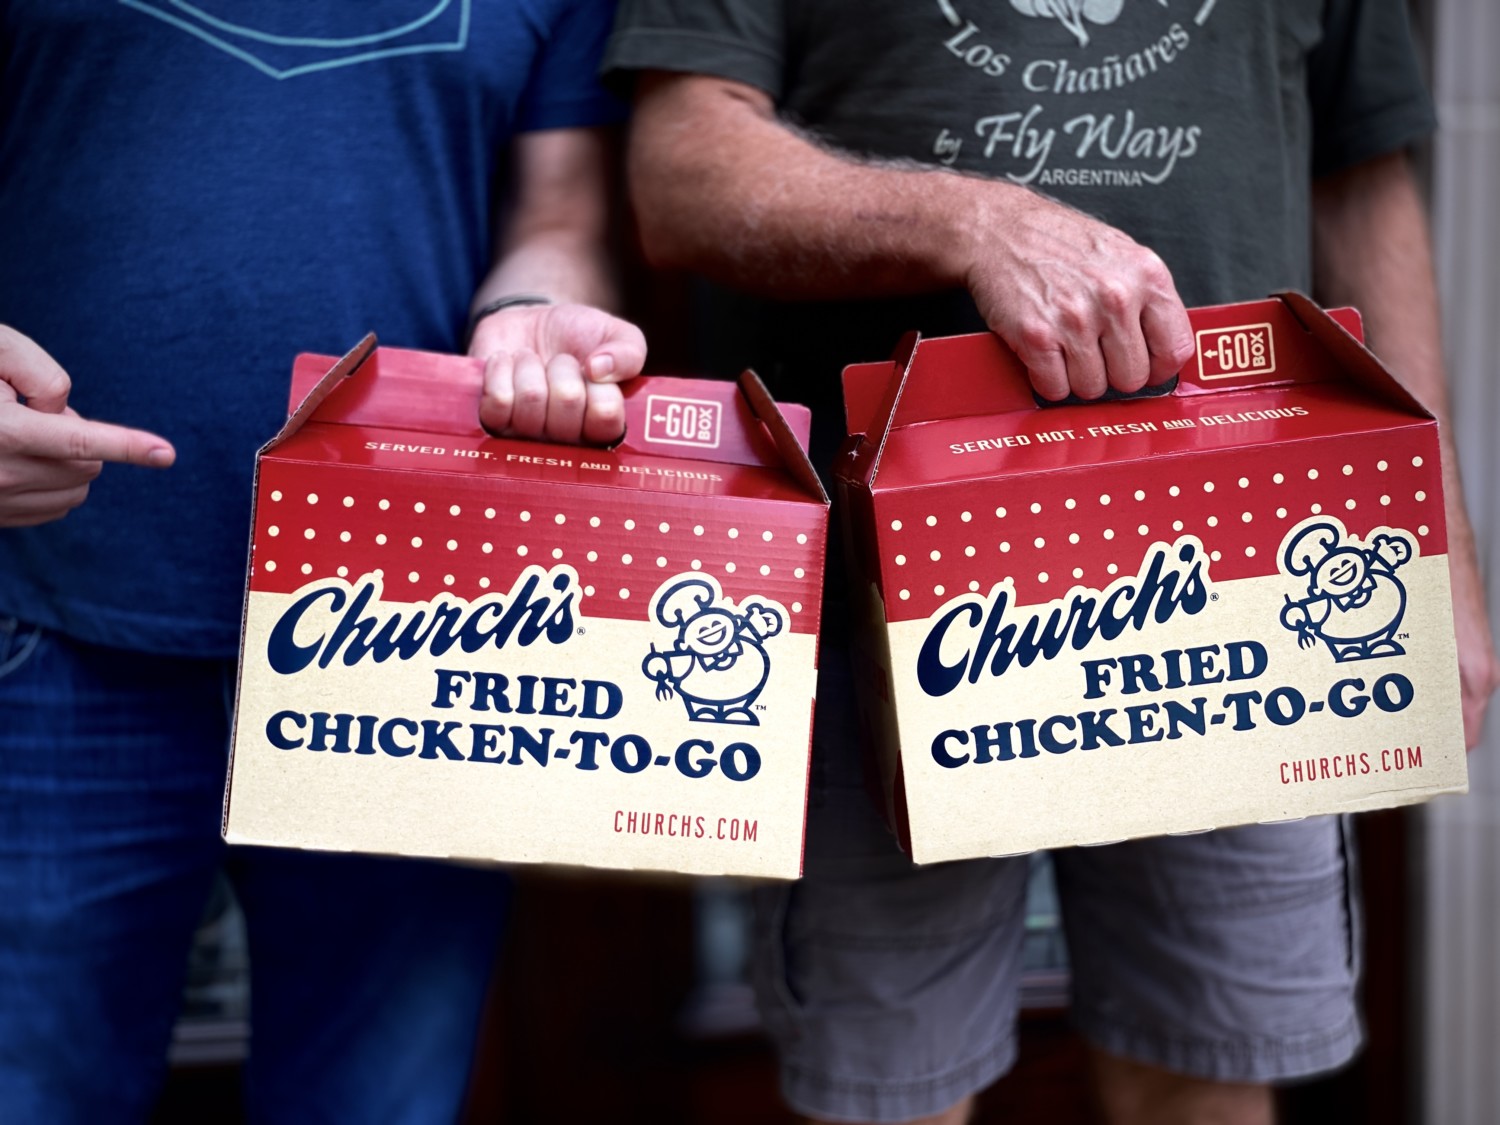 Go Box' chicken: Feed a family of six with Church's Chicken $20